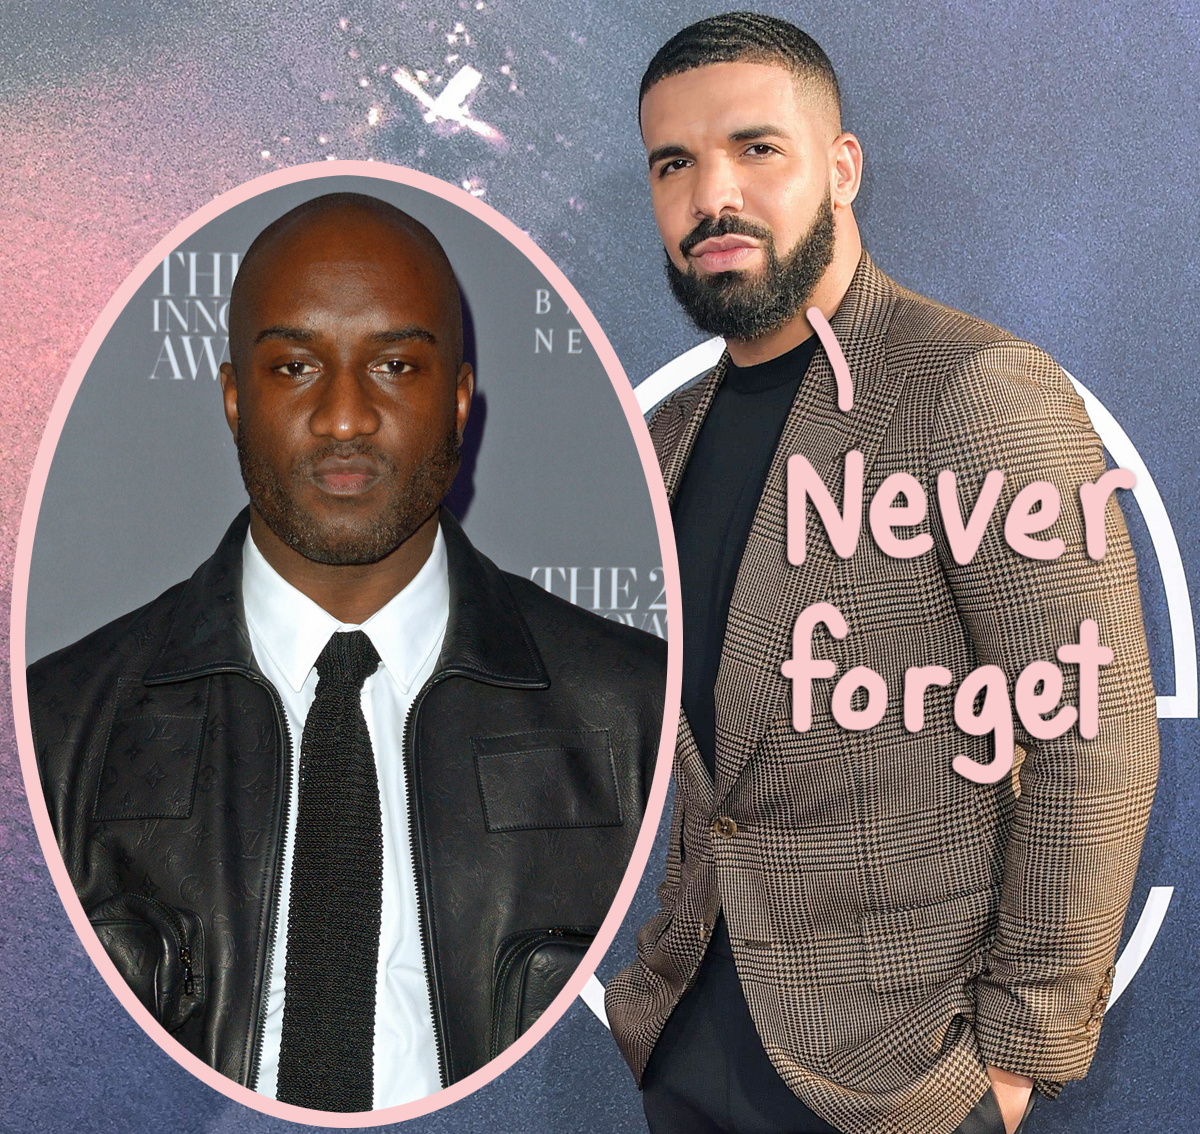 Drake Just Got A New Tattoo & It's A Heartwarming Tribute To Virgil Abloh  (PHOTO) - Narcity